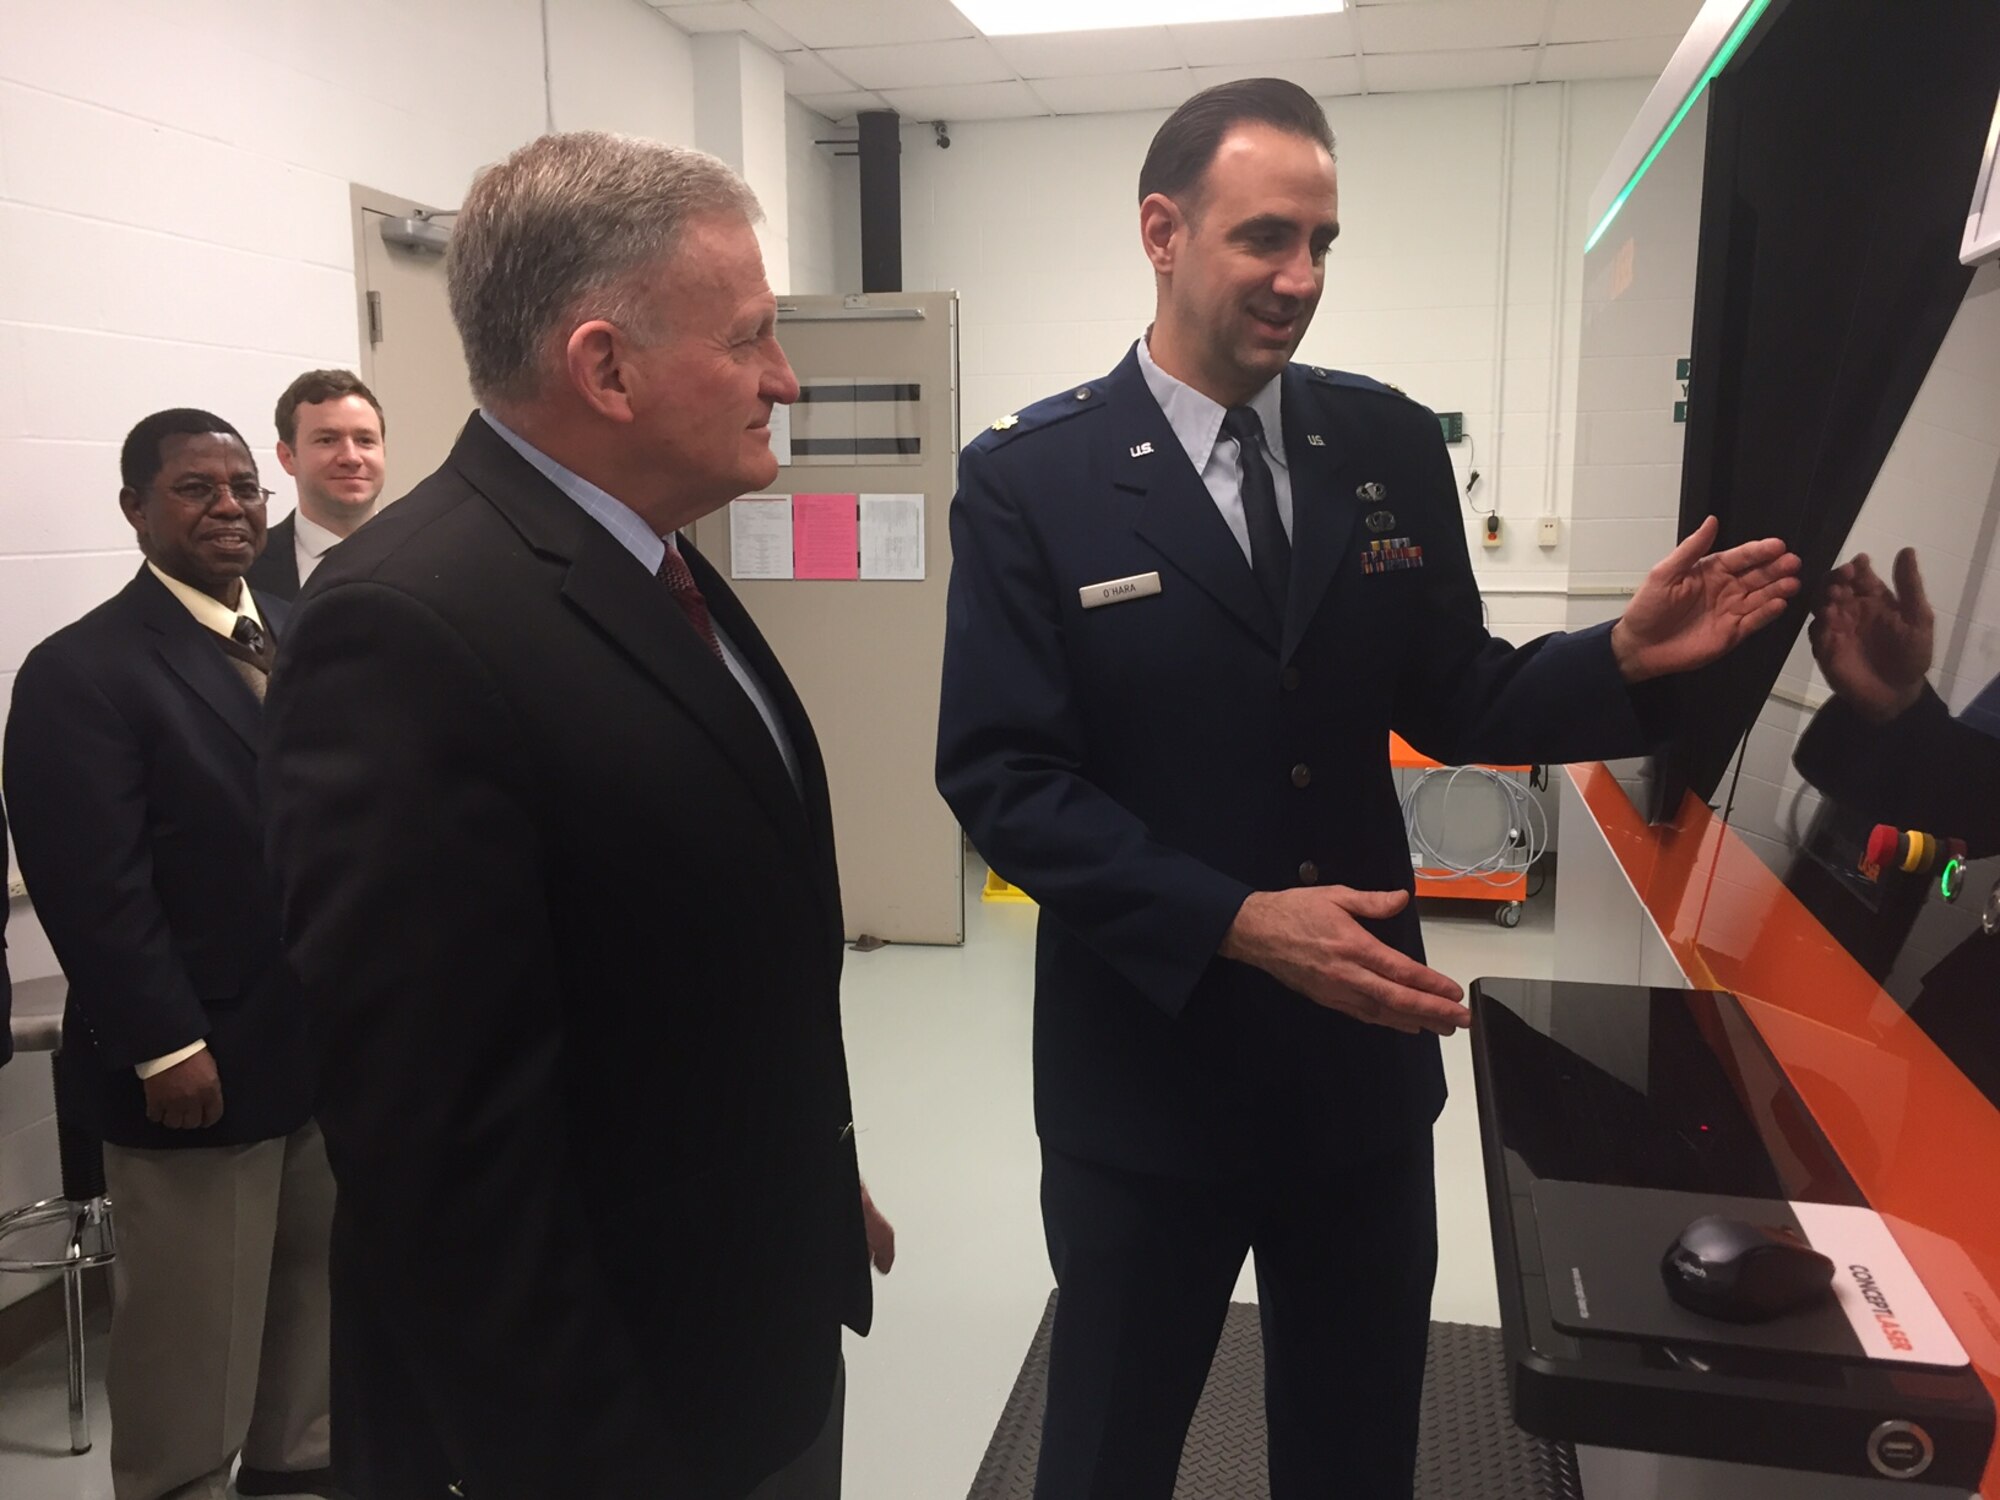 Major Ryan O’Hara (right), assistant professor, Graduate School of Engineering and Management, Air Force Institute of Technology, Wright-Patterson Air Force Base, demonstrates the capabilities of a new state-of-the-art 3D metal additive manufacturing system to Dr. Todd Stewart, AFIT director and chancellor, March 16.The system is a nearly $1 million investment that enables student researchers to digitally fabricate fully dense aerospace metal parts.(Skywrighter photo/Amy Rollins)